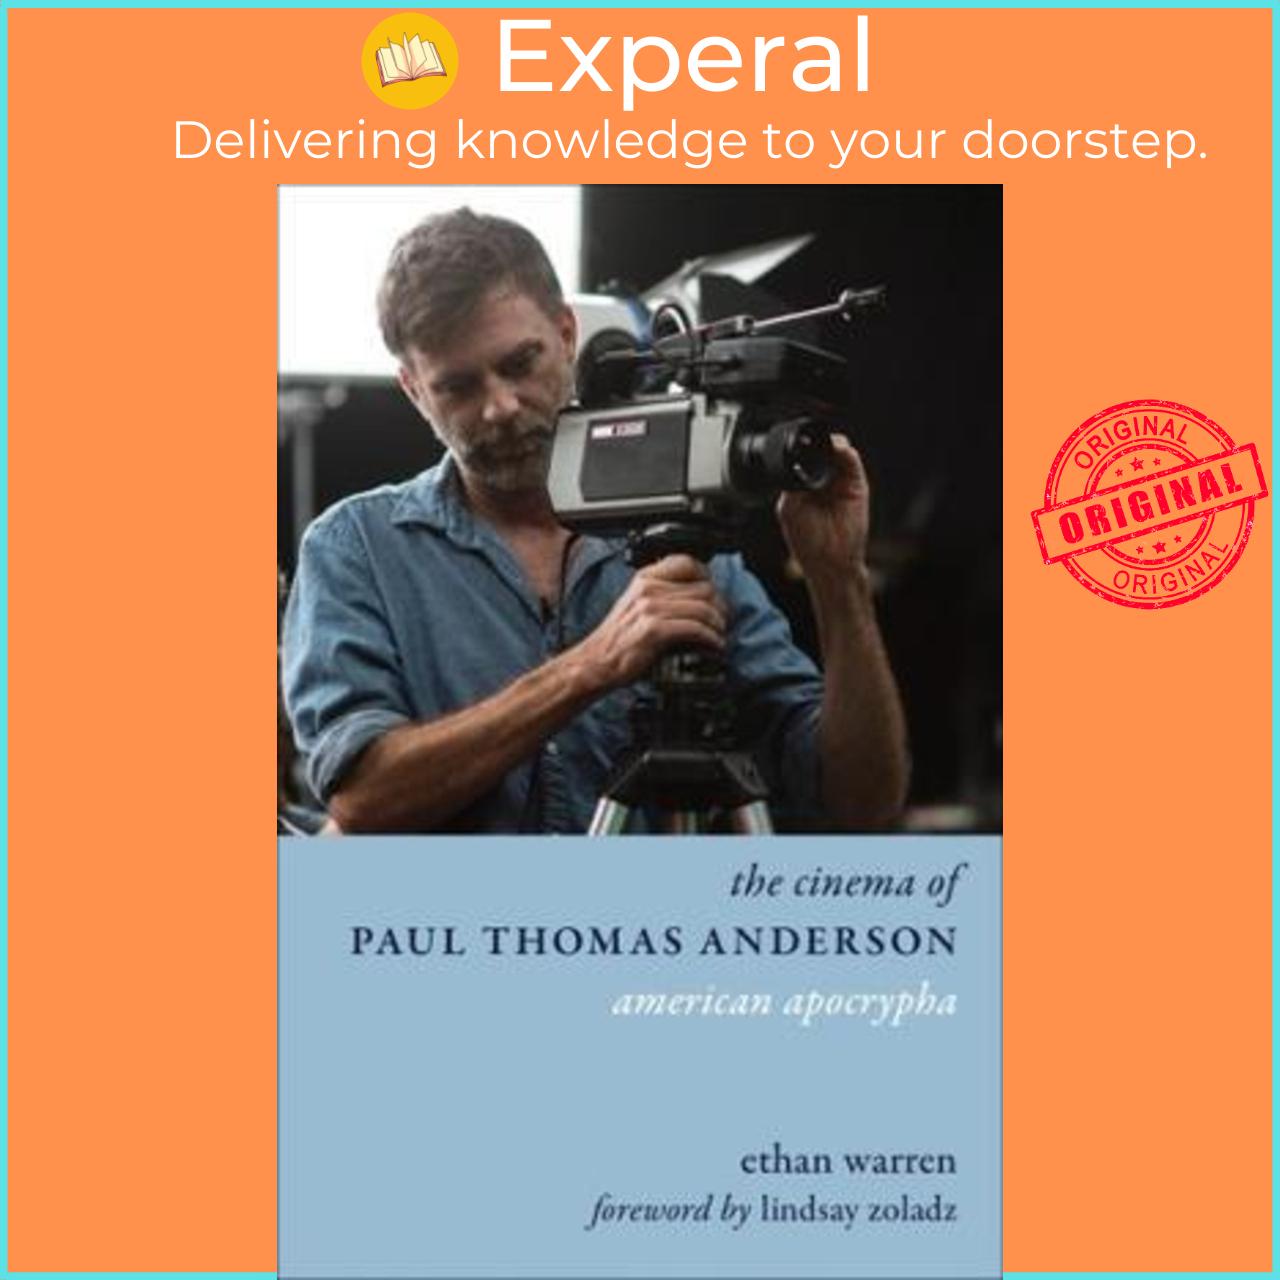 Sách - The Cinema of Paul Thomas Anderson : American Apocrypha by Ethan Warren (US edition, hardcover)